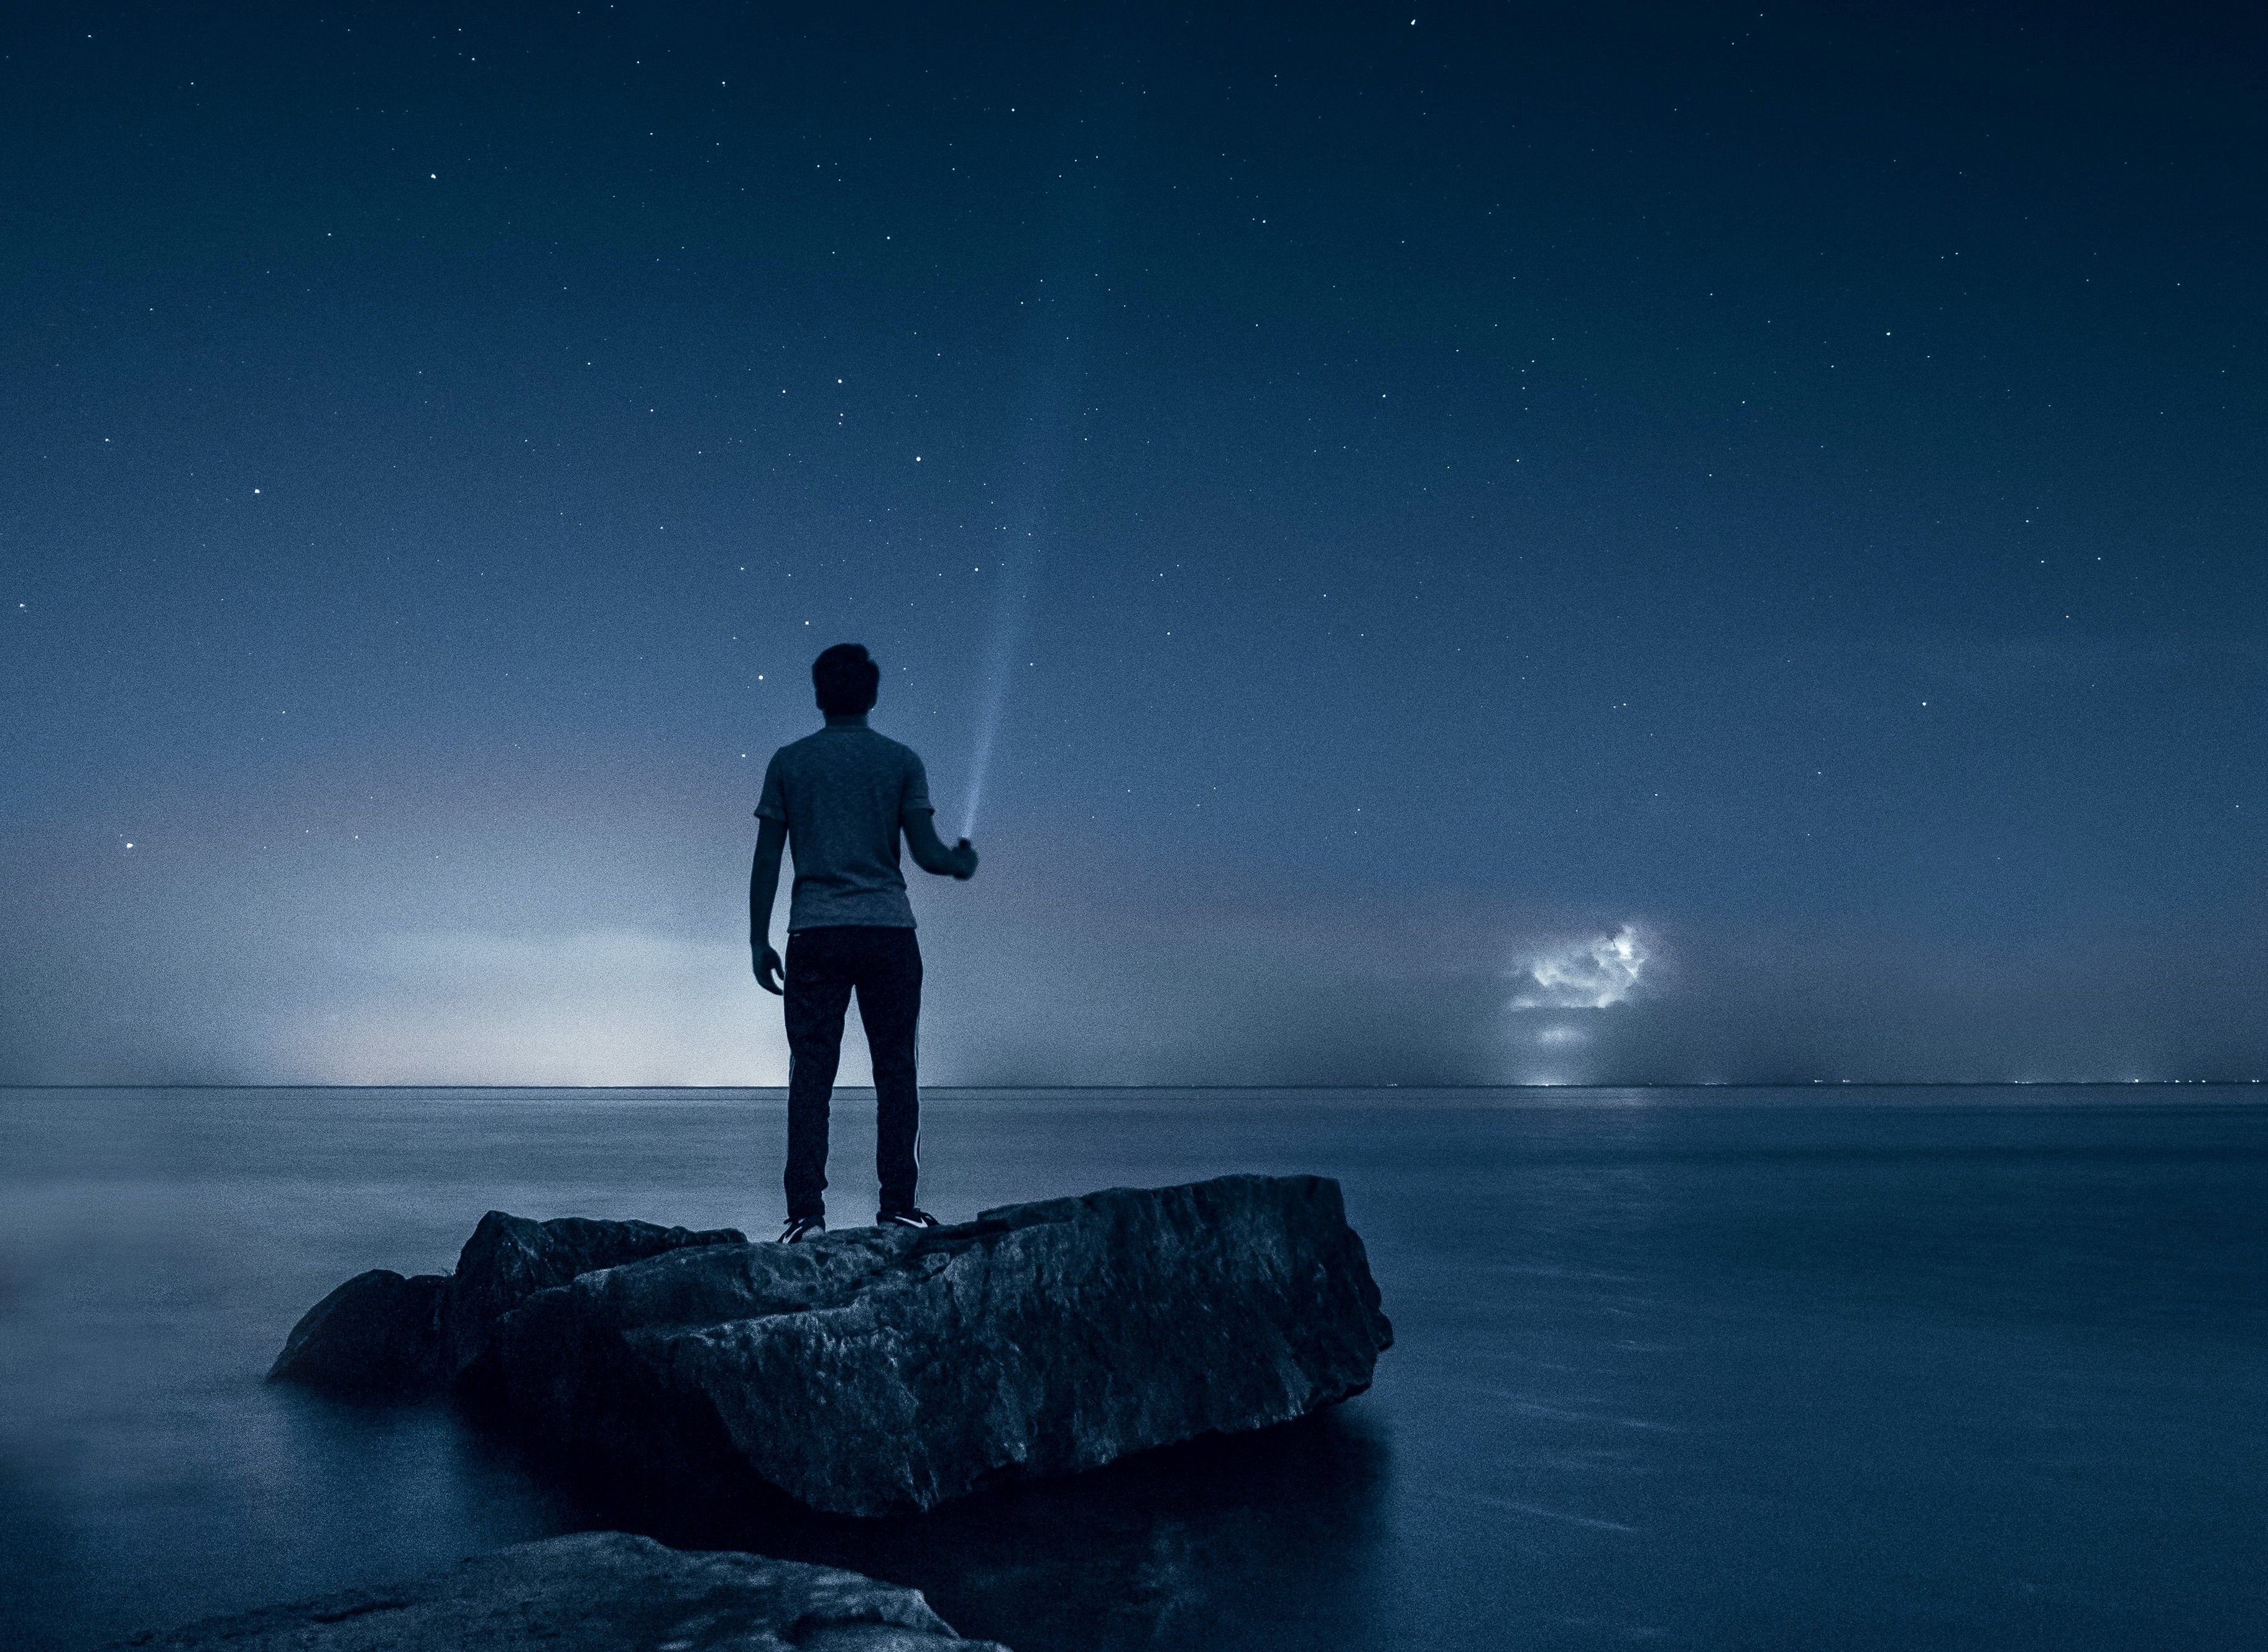 A person on a rock in the middle of the ocean at night.